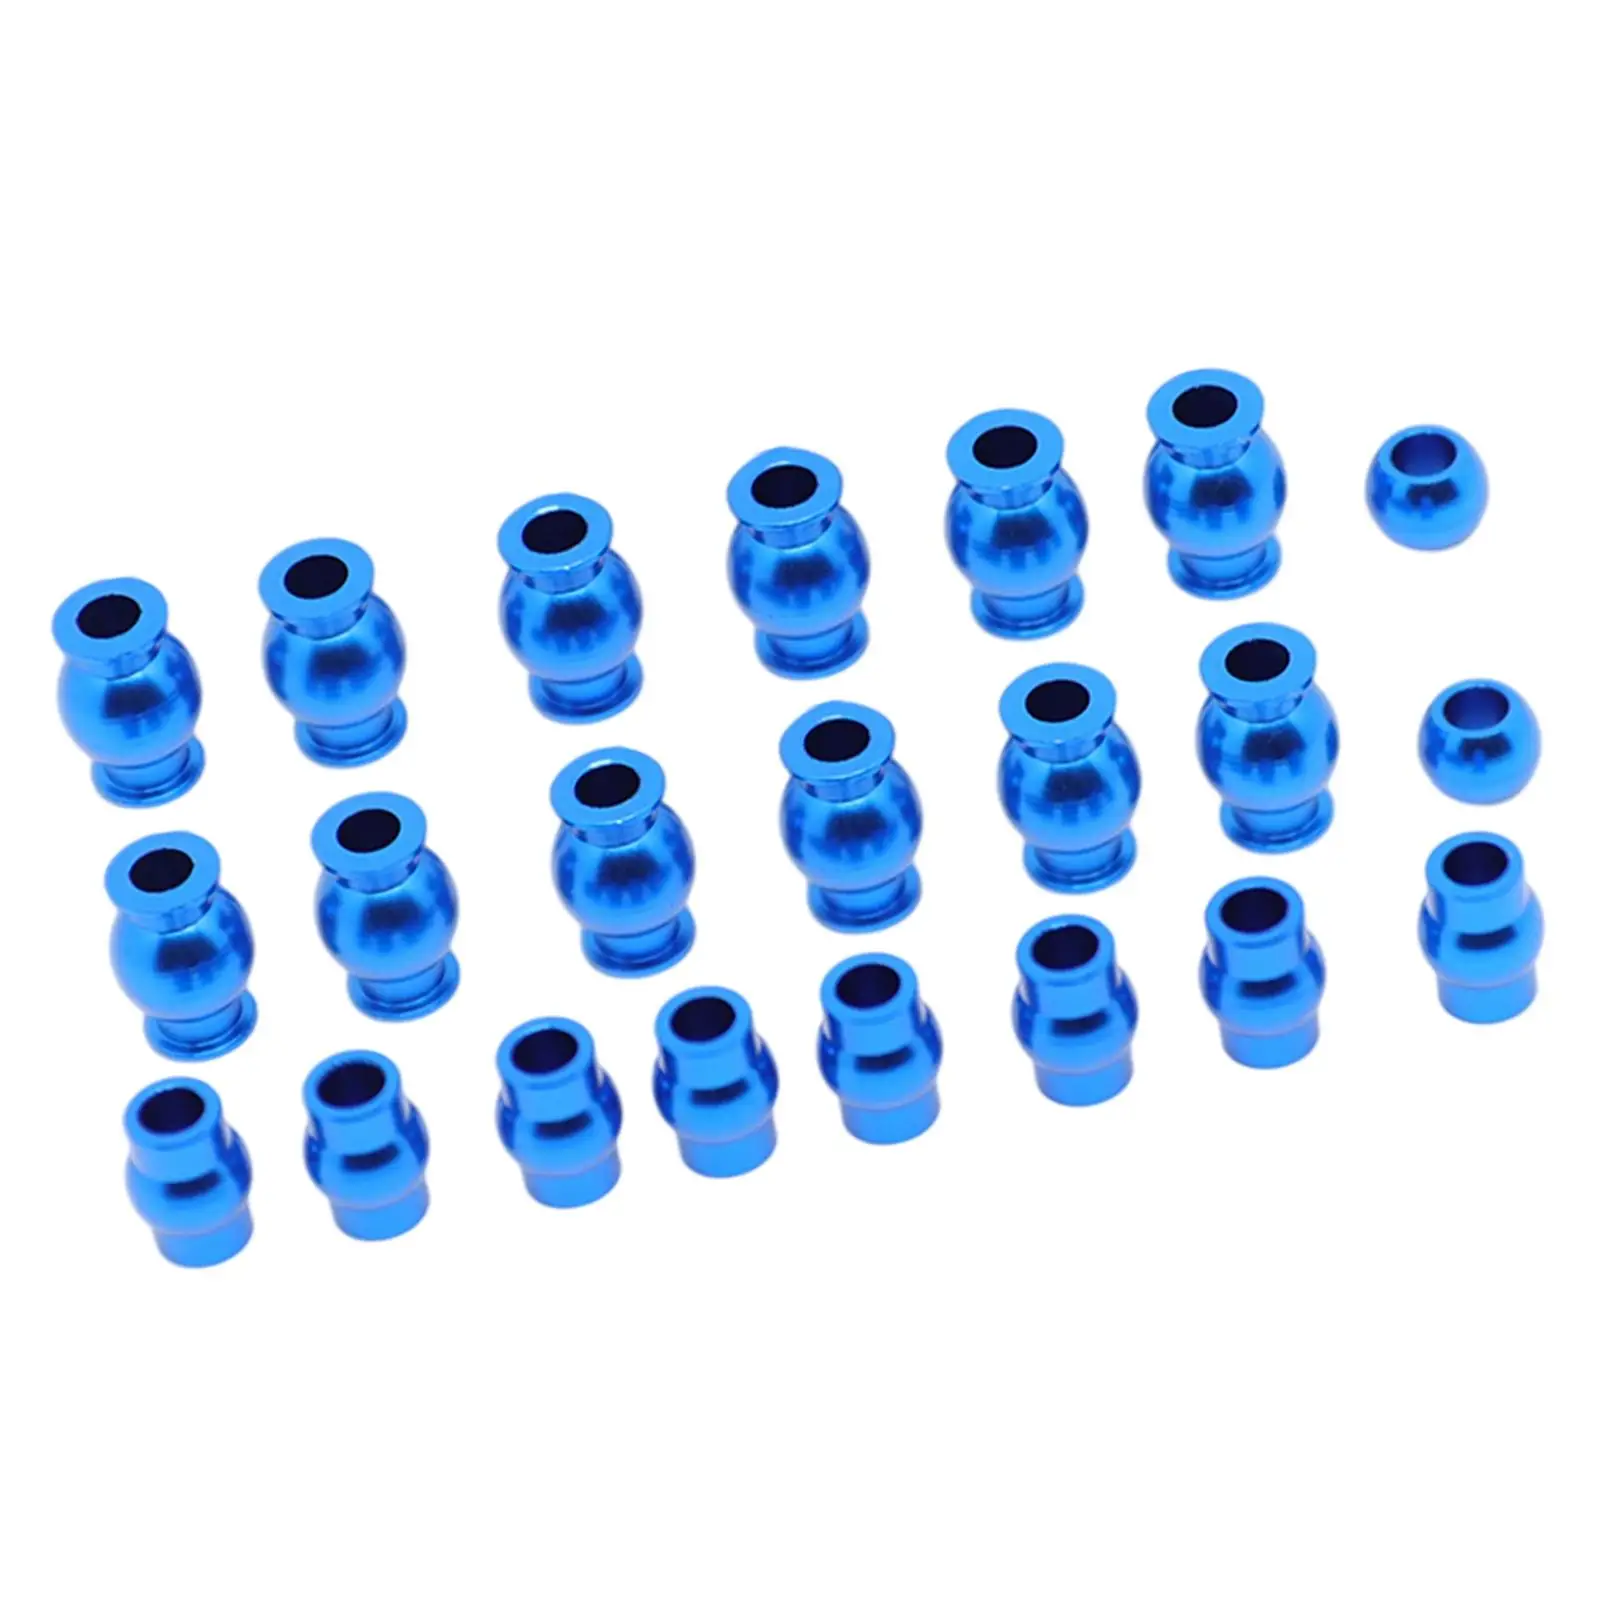 22Pcs RC Truck Ball Head for Arrma Big Rock Senton Typhon 4X4 3S BLX Brushless 1/10 Truck Electric Toy Accessories